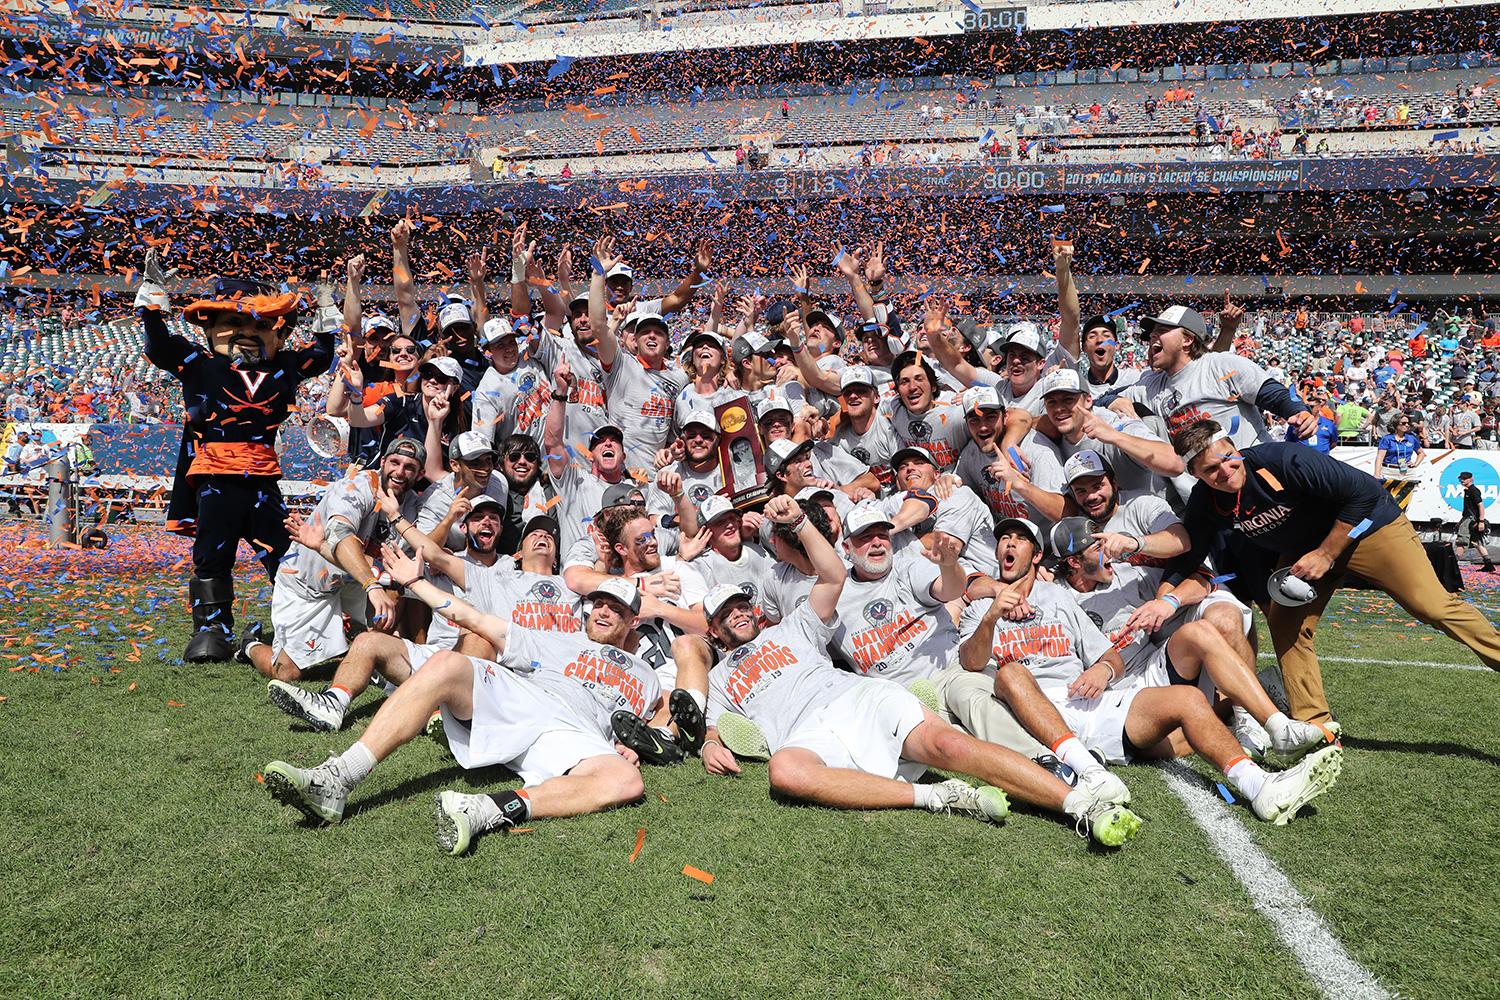 The men’s lacrosse team celebrating their victory on the field while holding their NCAA trophy and falling confetti